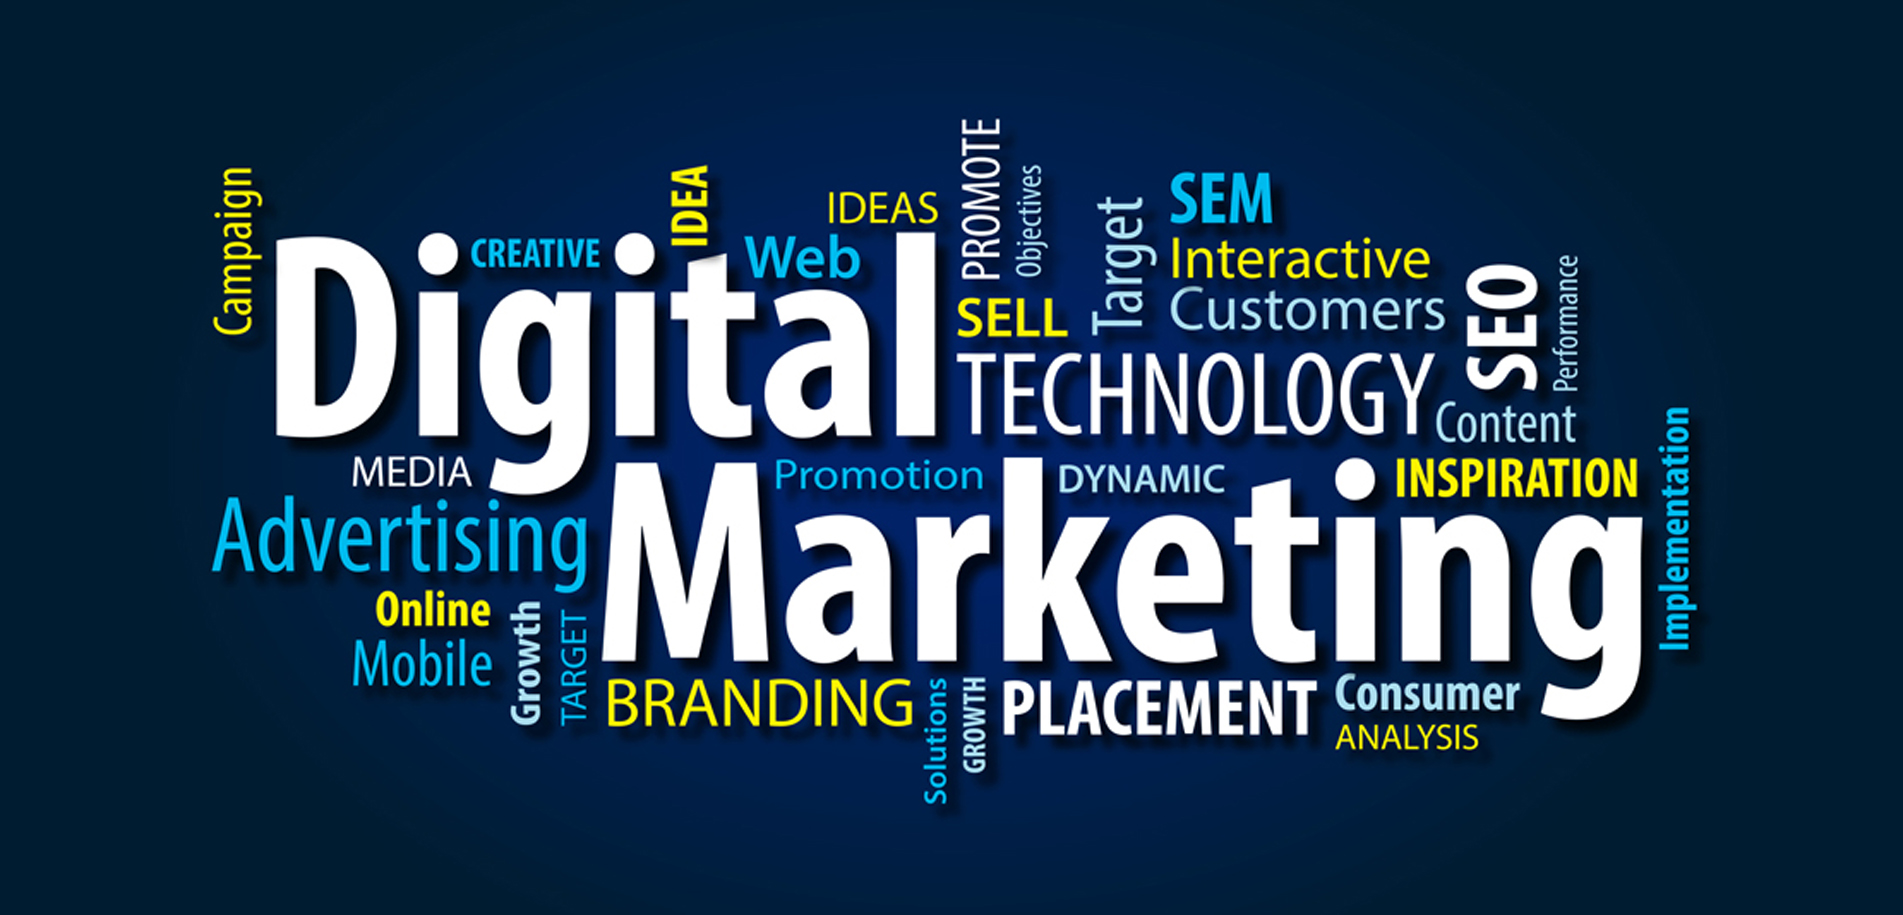 Make the correct choice for your digital marketing requirements